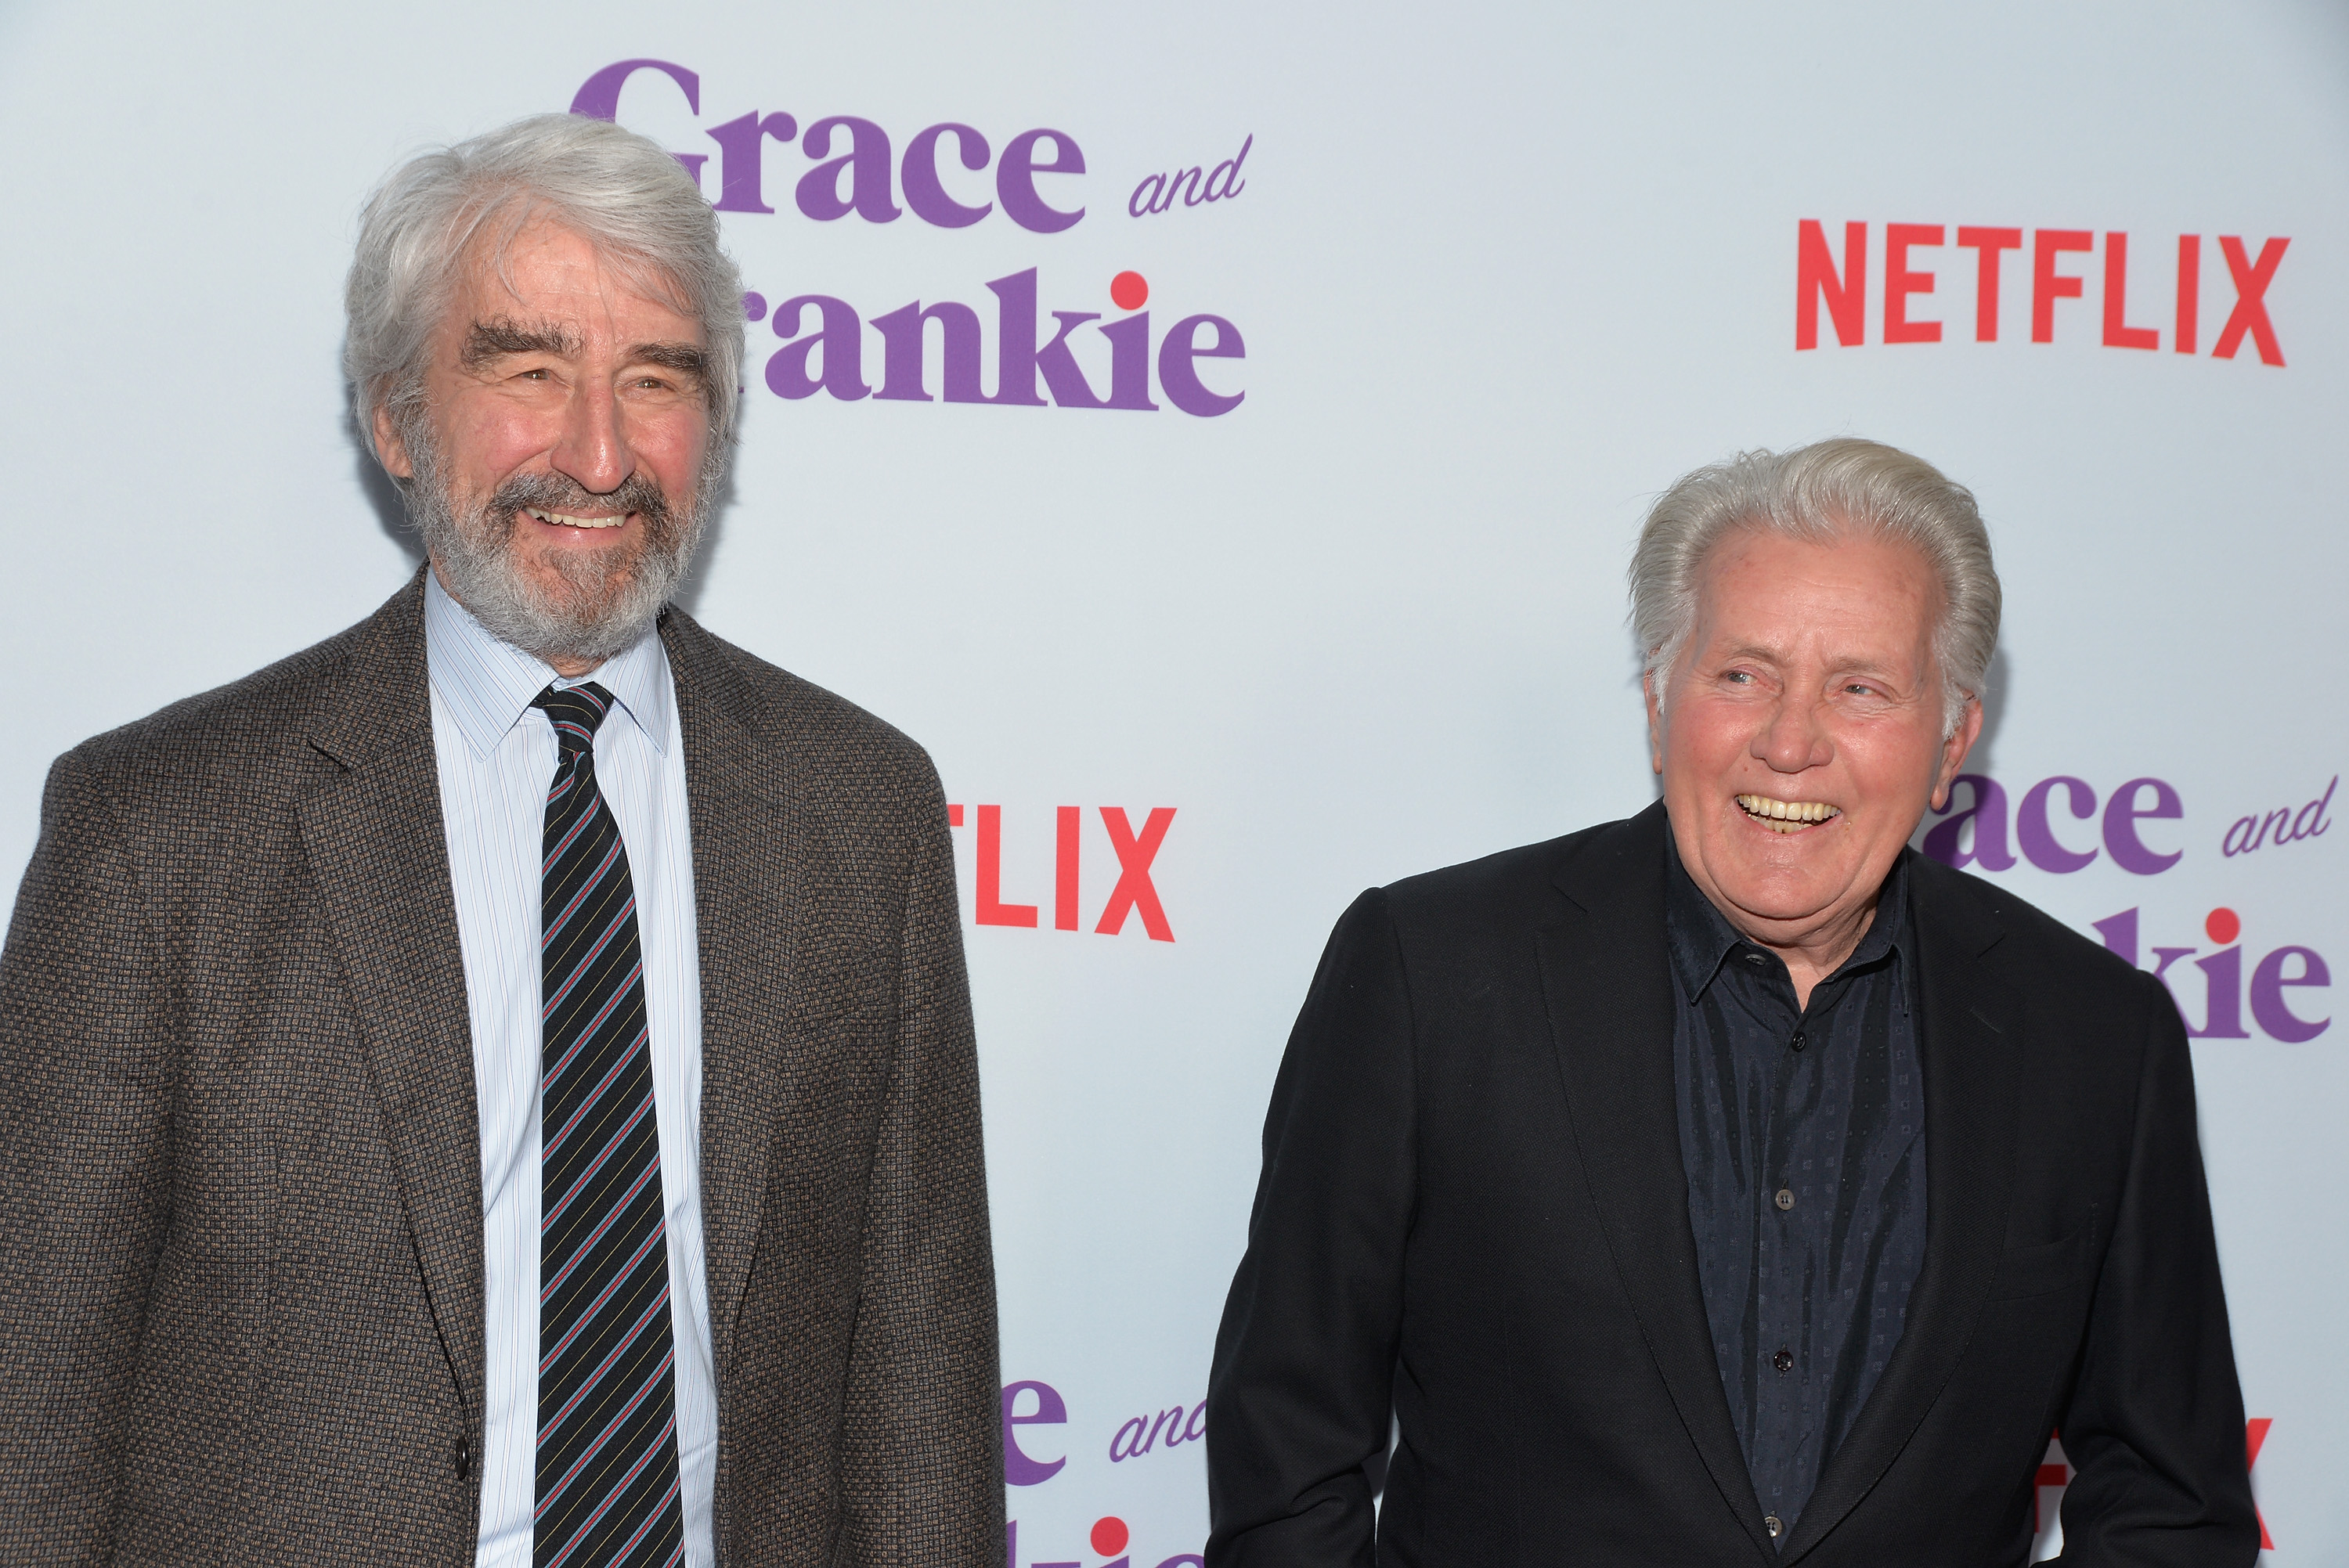 Sam Waterston and Martin Sheen laugh while taking a photo together.